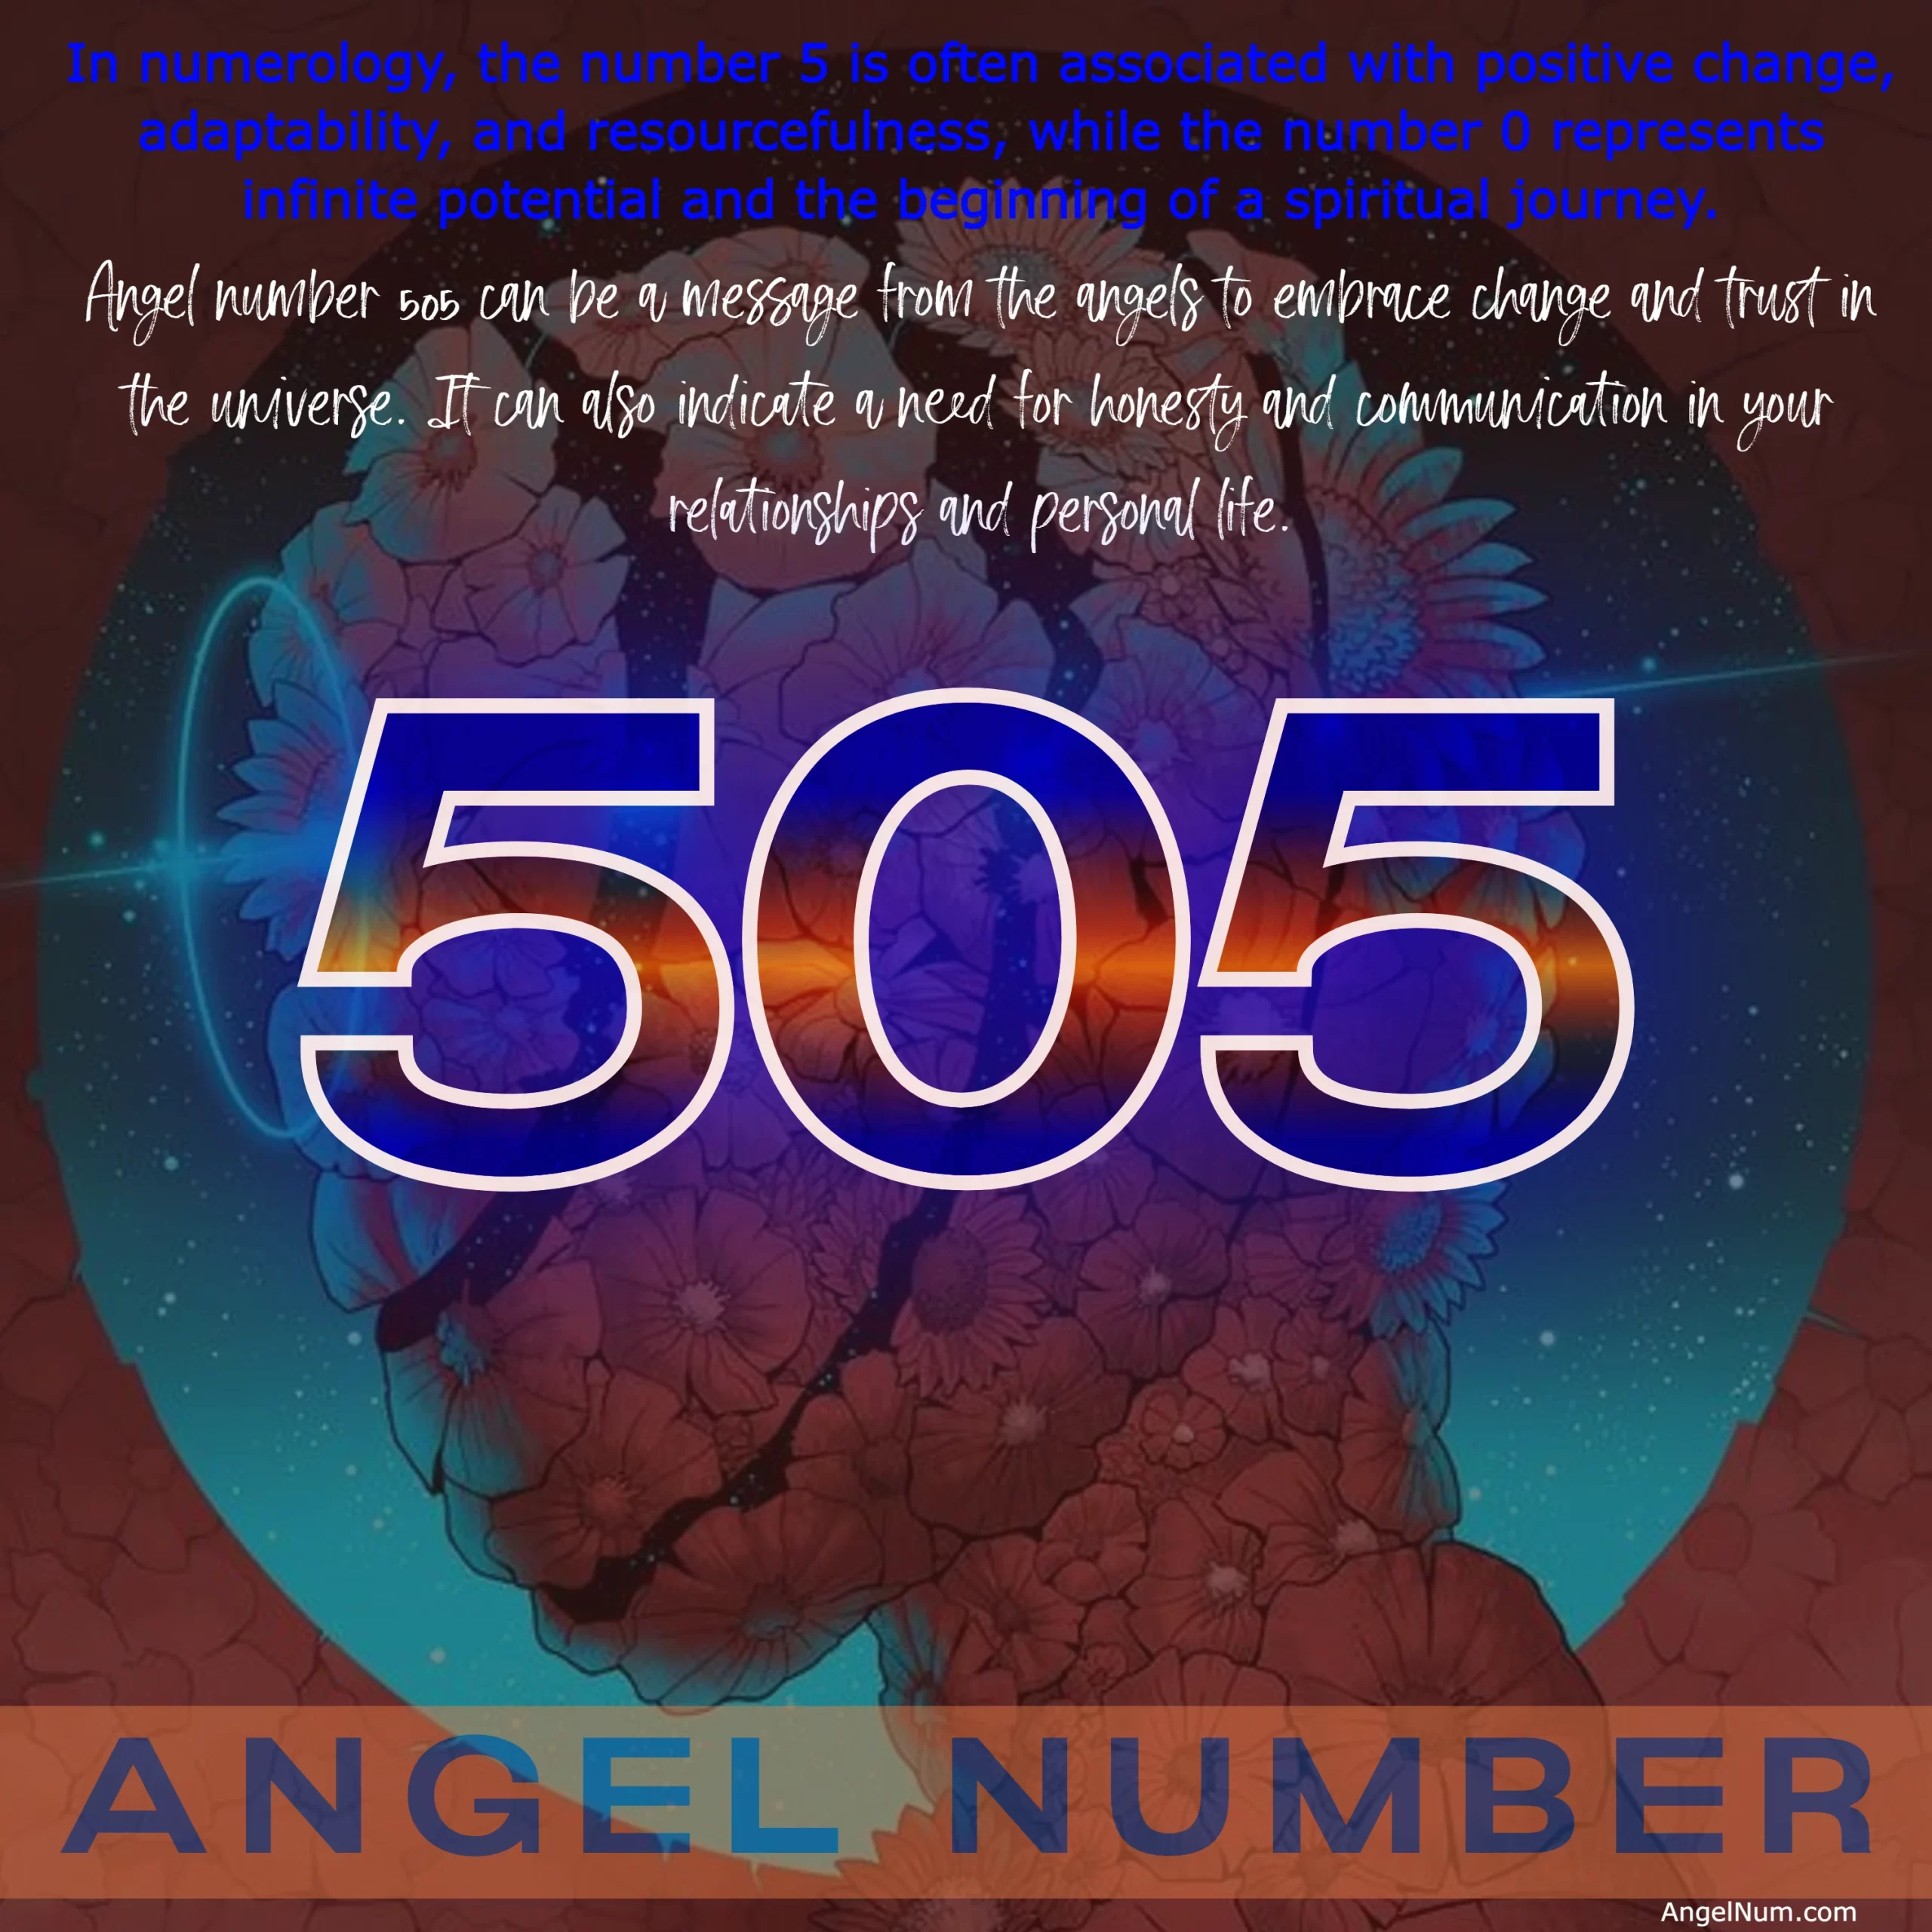 Discover the Meaning and Significance of Angel Number 505